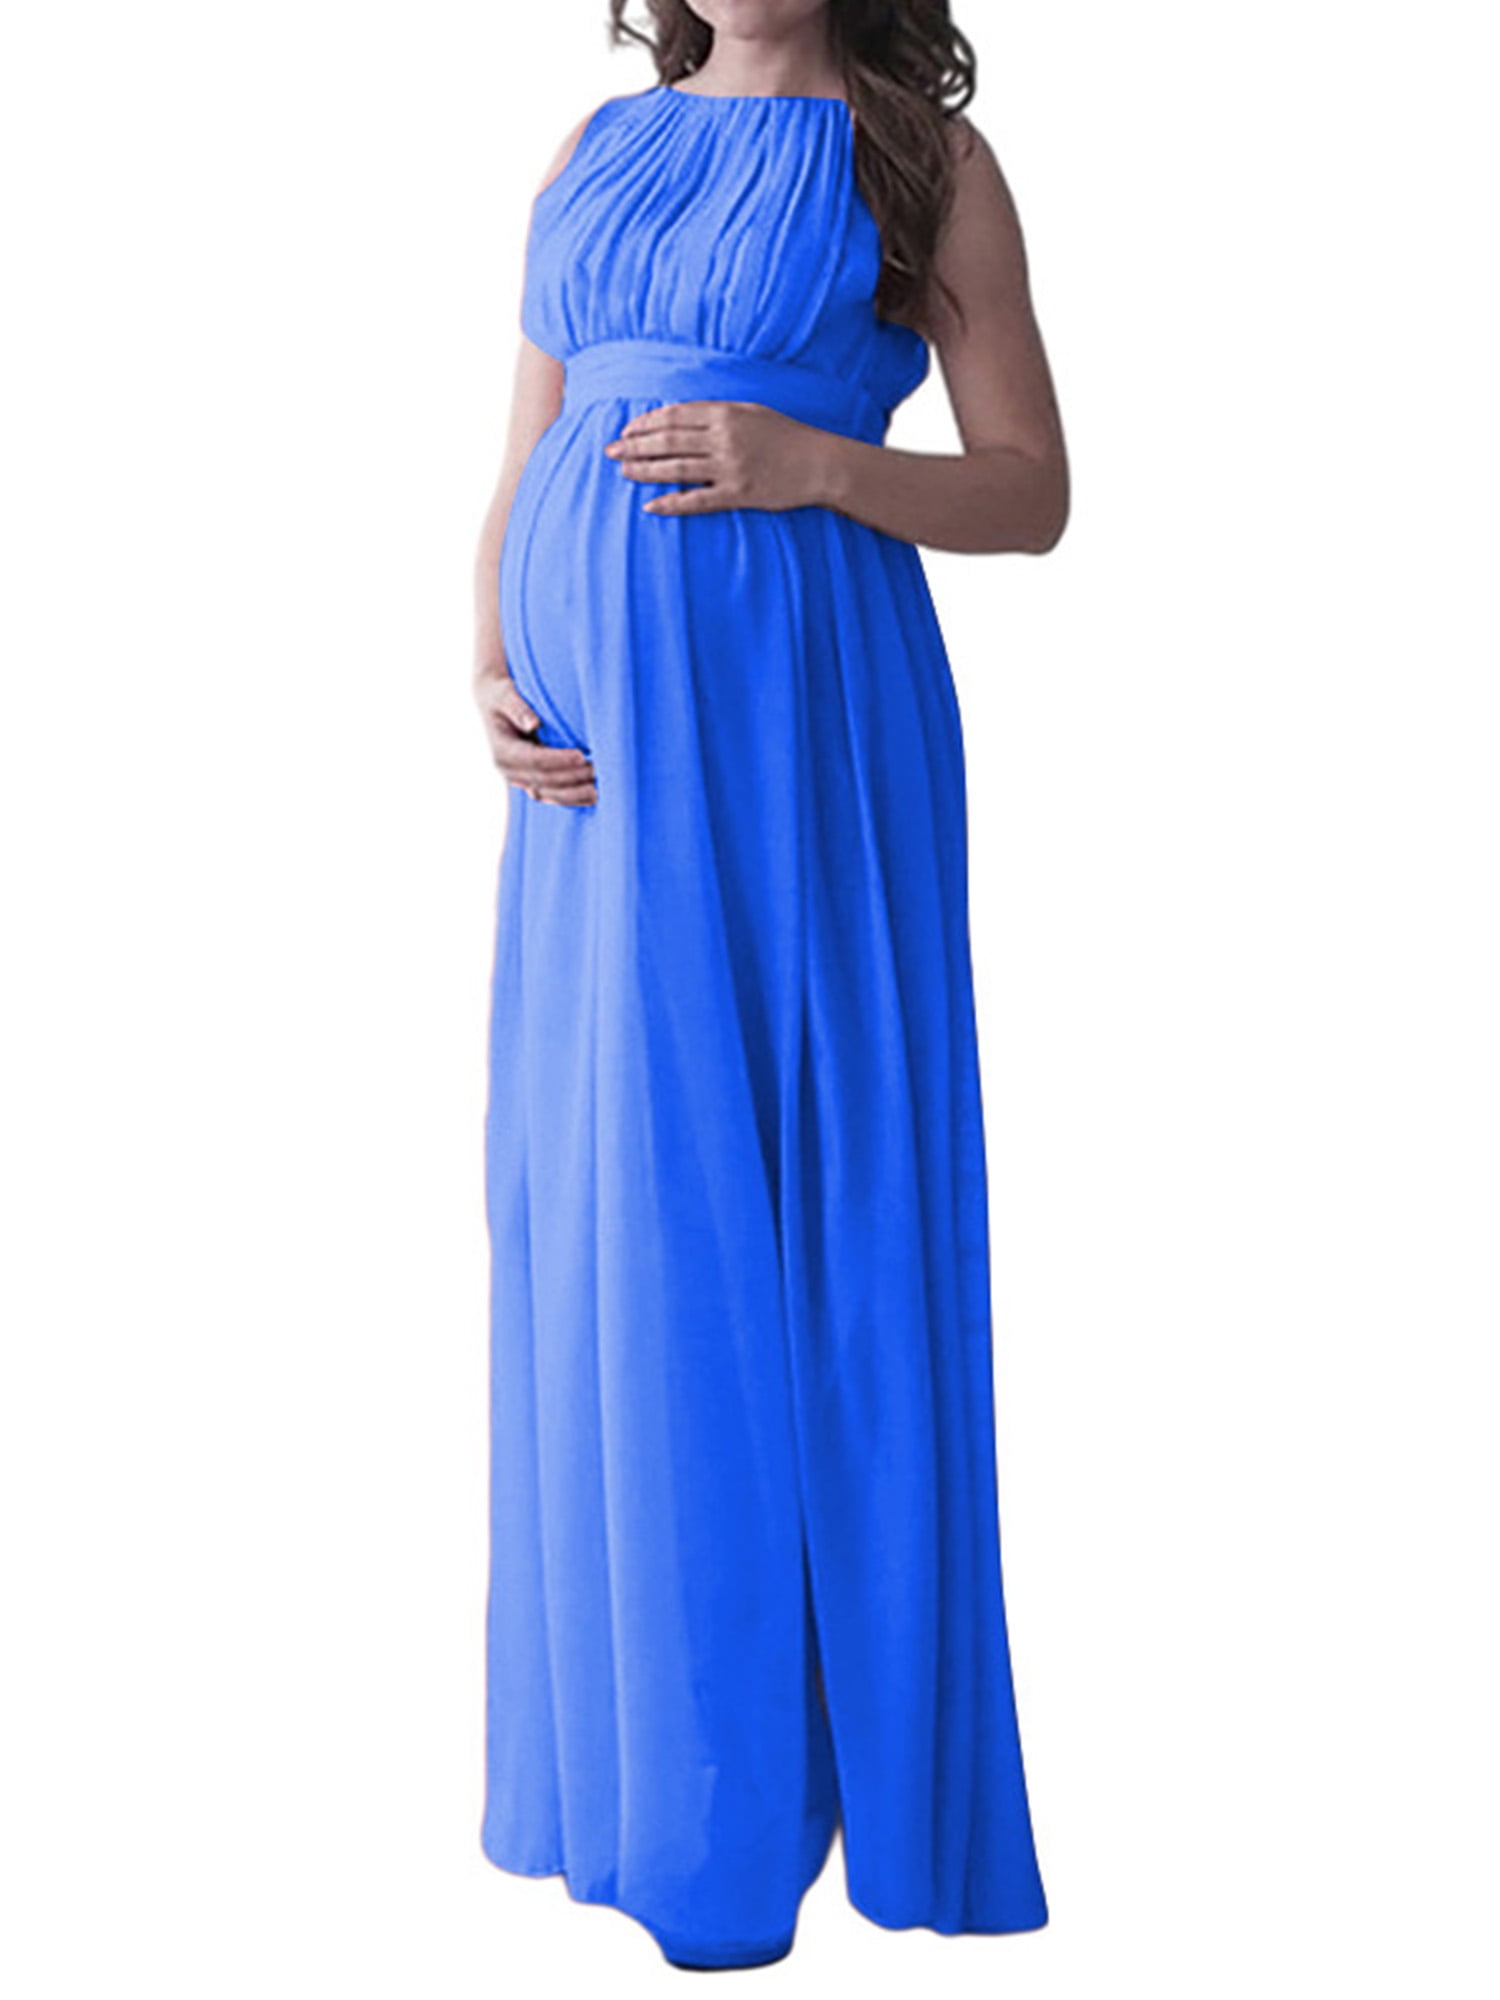 Bomotoo Maternity Photography Sleeveless Chiffon Long Dress Ruched Pleated Pregnancy Gown for Baby Shower Photo Shoot 5acc2ac2 f05d 4015 b66c d582b2f3d571.513ebd69d29a9f437d93a0e996875c5f